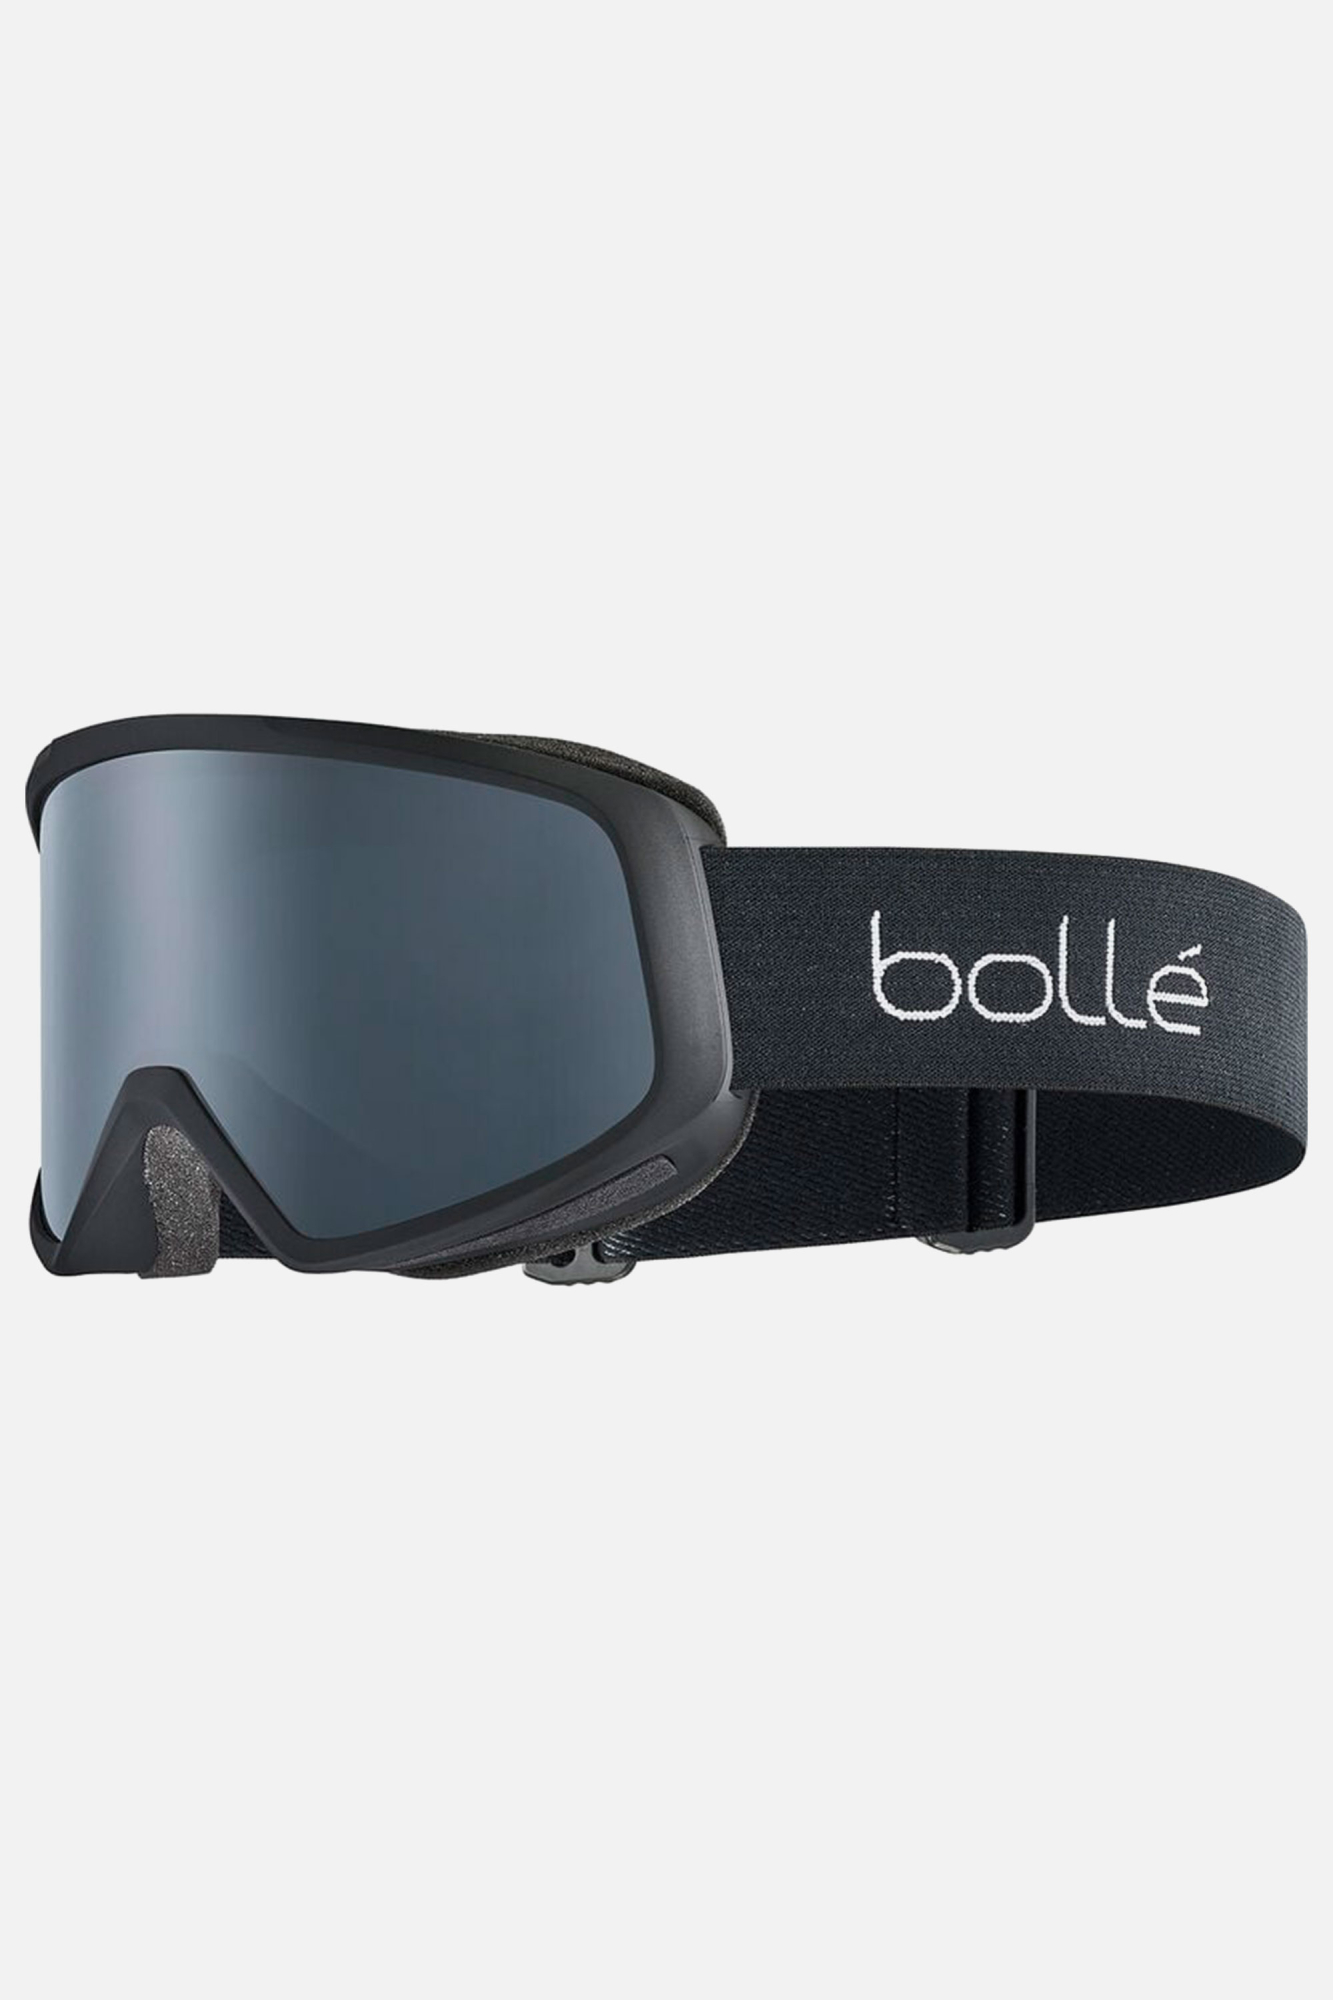 Bolle Unisex Bedrock Matte Goggles Grey - Size: ONE